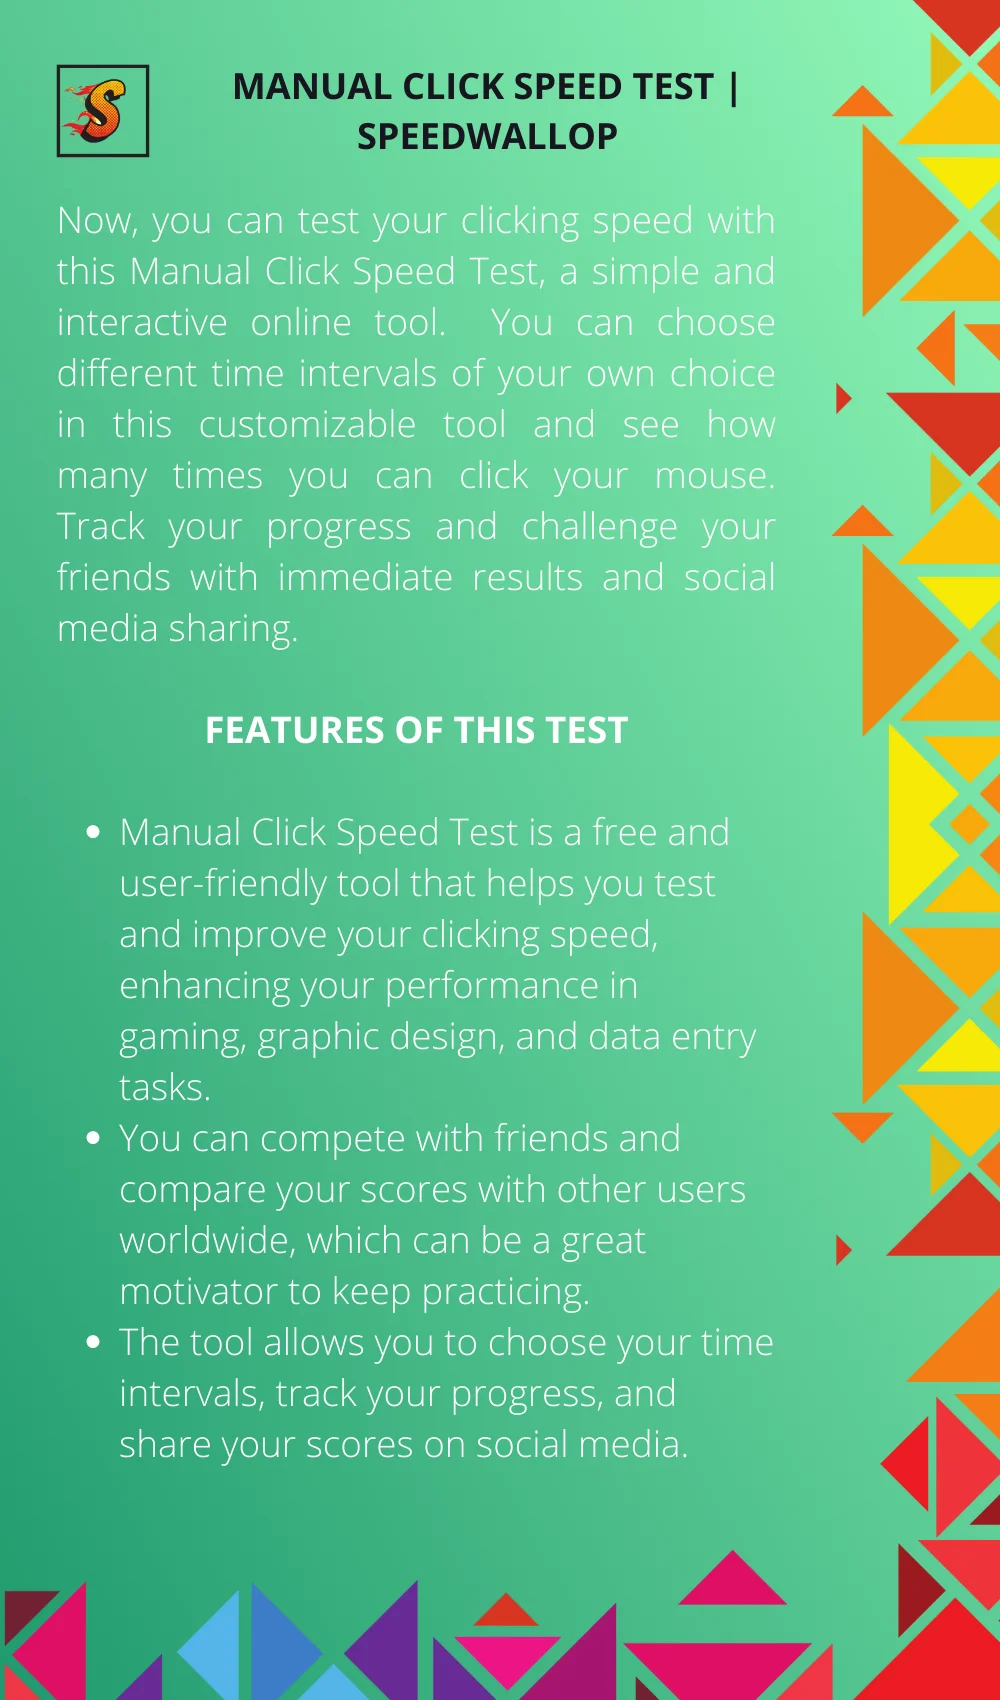 Manual Click Speed Test - Joltfly